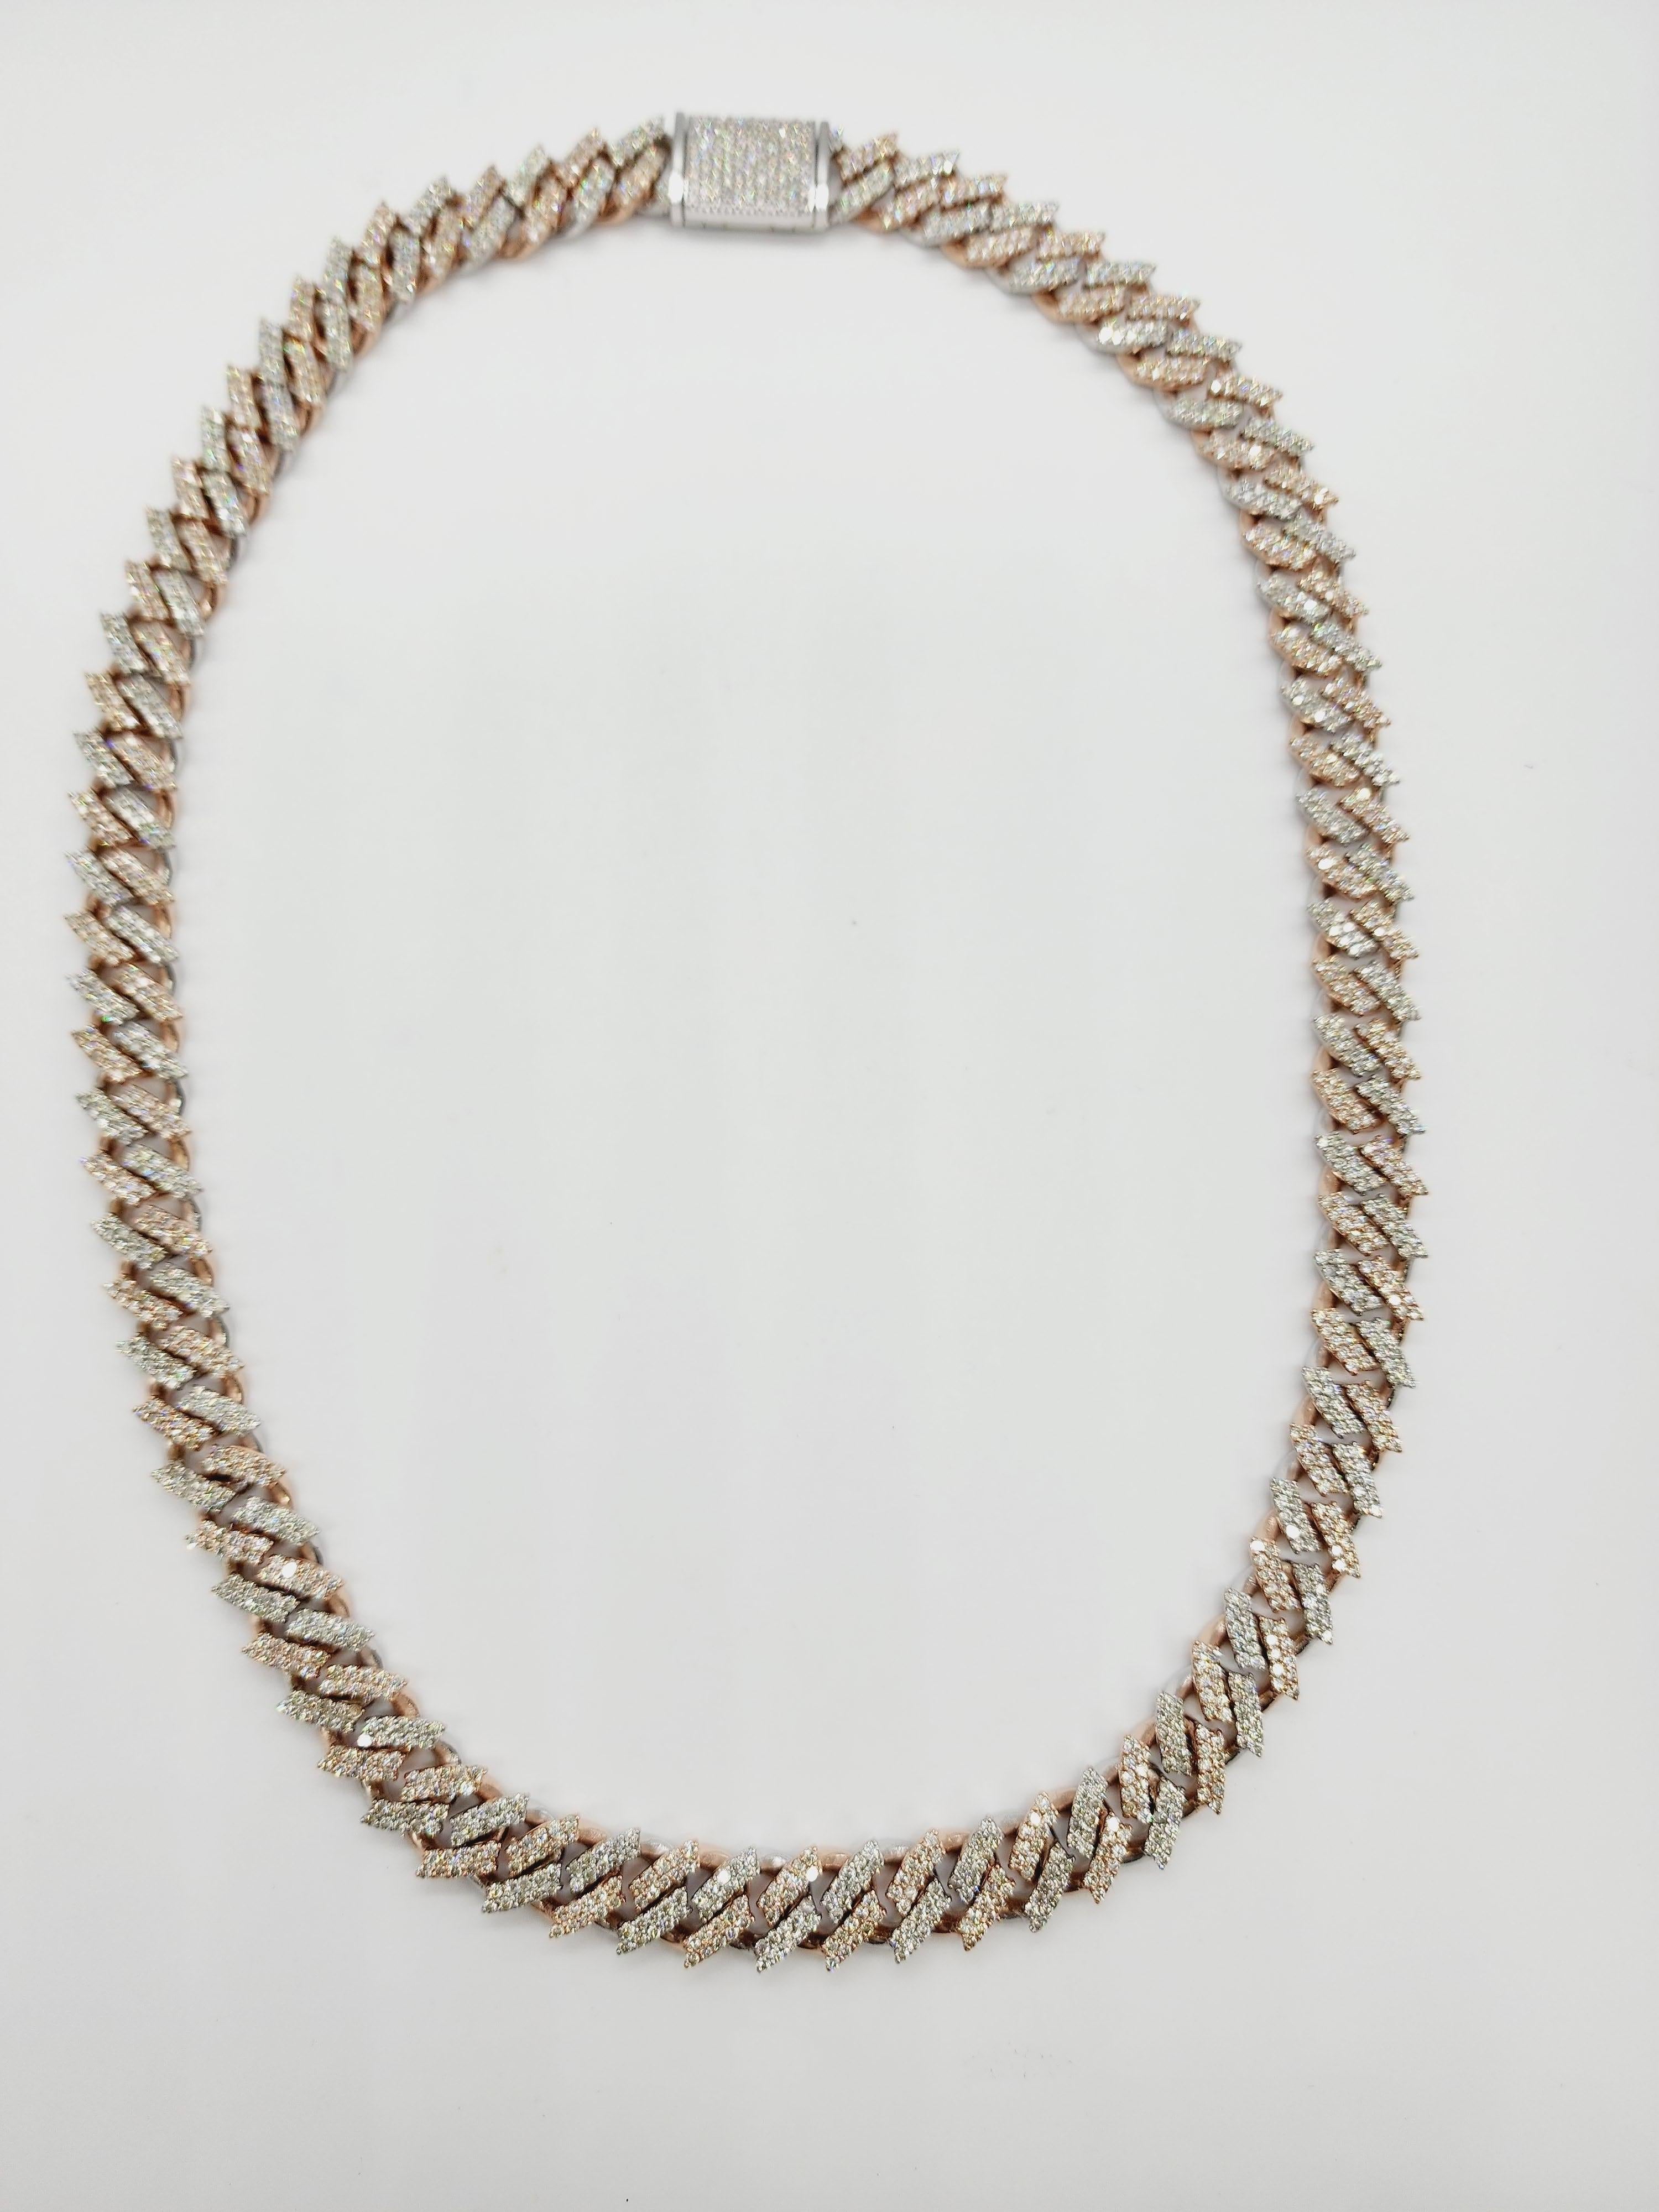 16.25 Carats Total Weight Heavy Gold Cuban Necklace Chain 14 Karats 
Two Tone Rose and White Gold 
16 inch , 12 mm wide, Average Color I, Clarity SI, Natural Diamonds. 116 Grams.